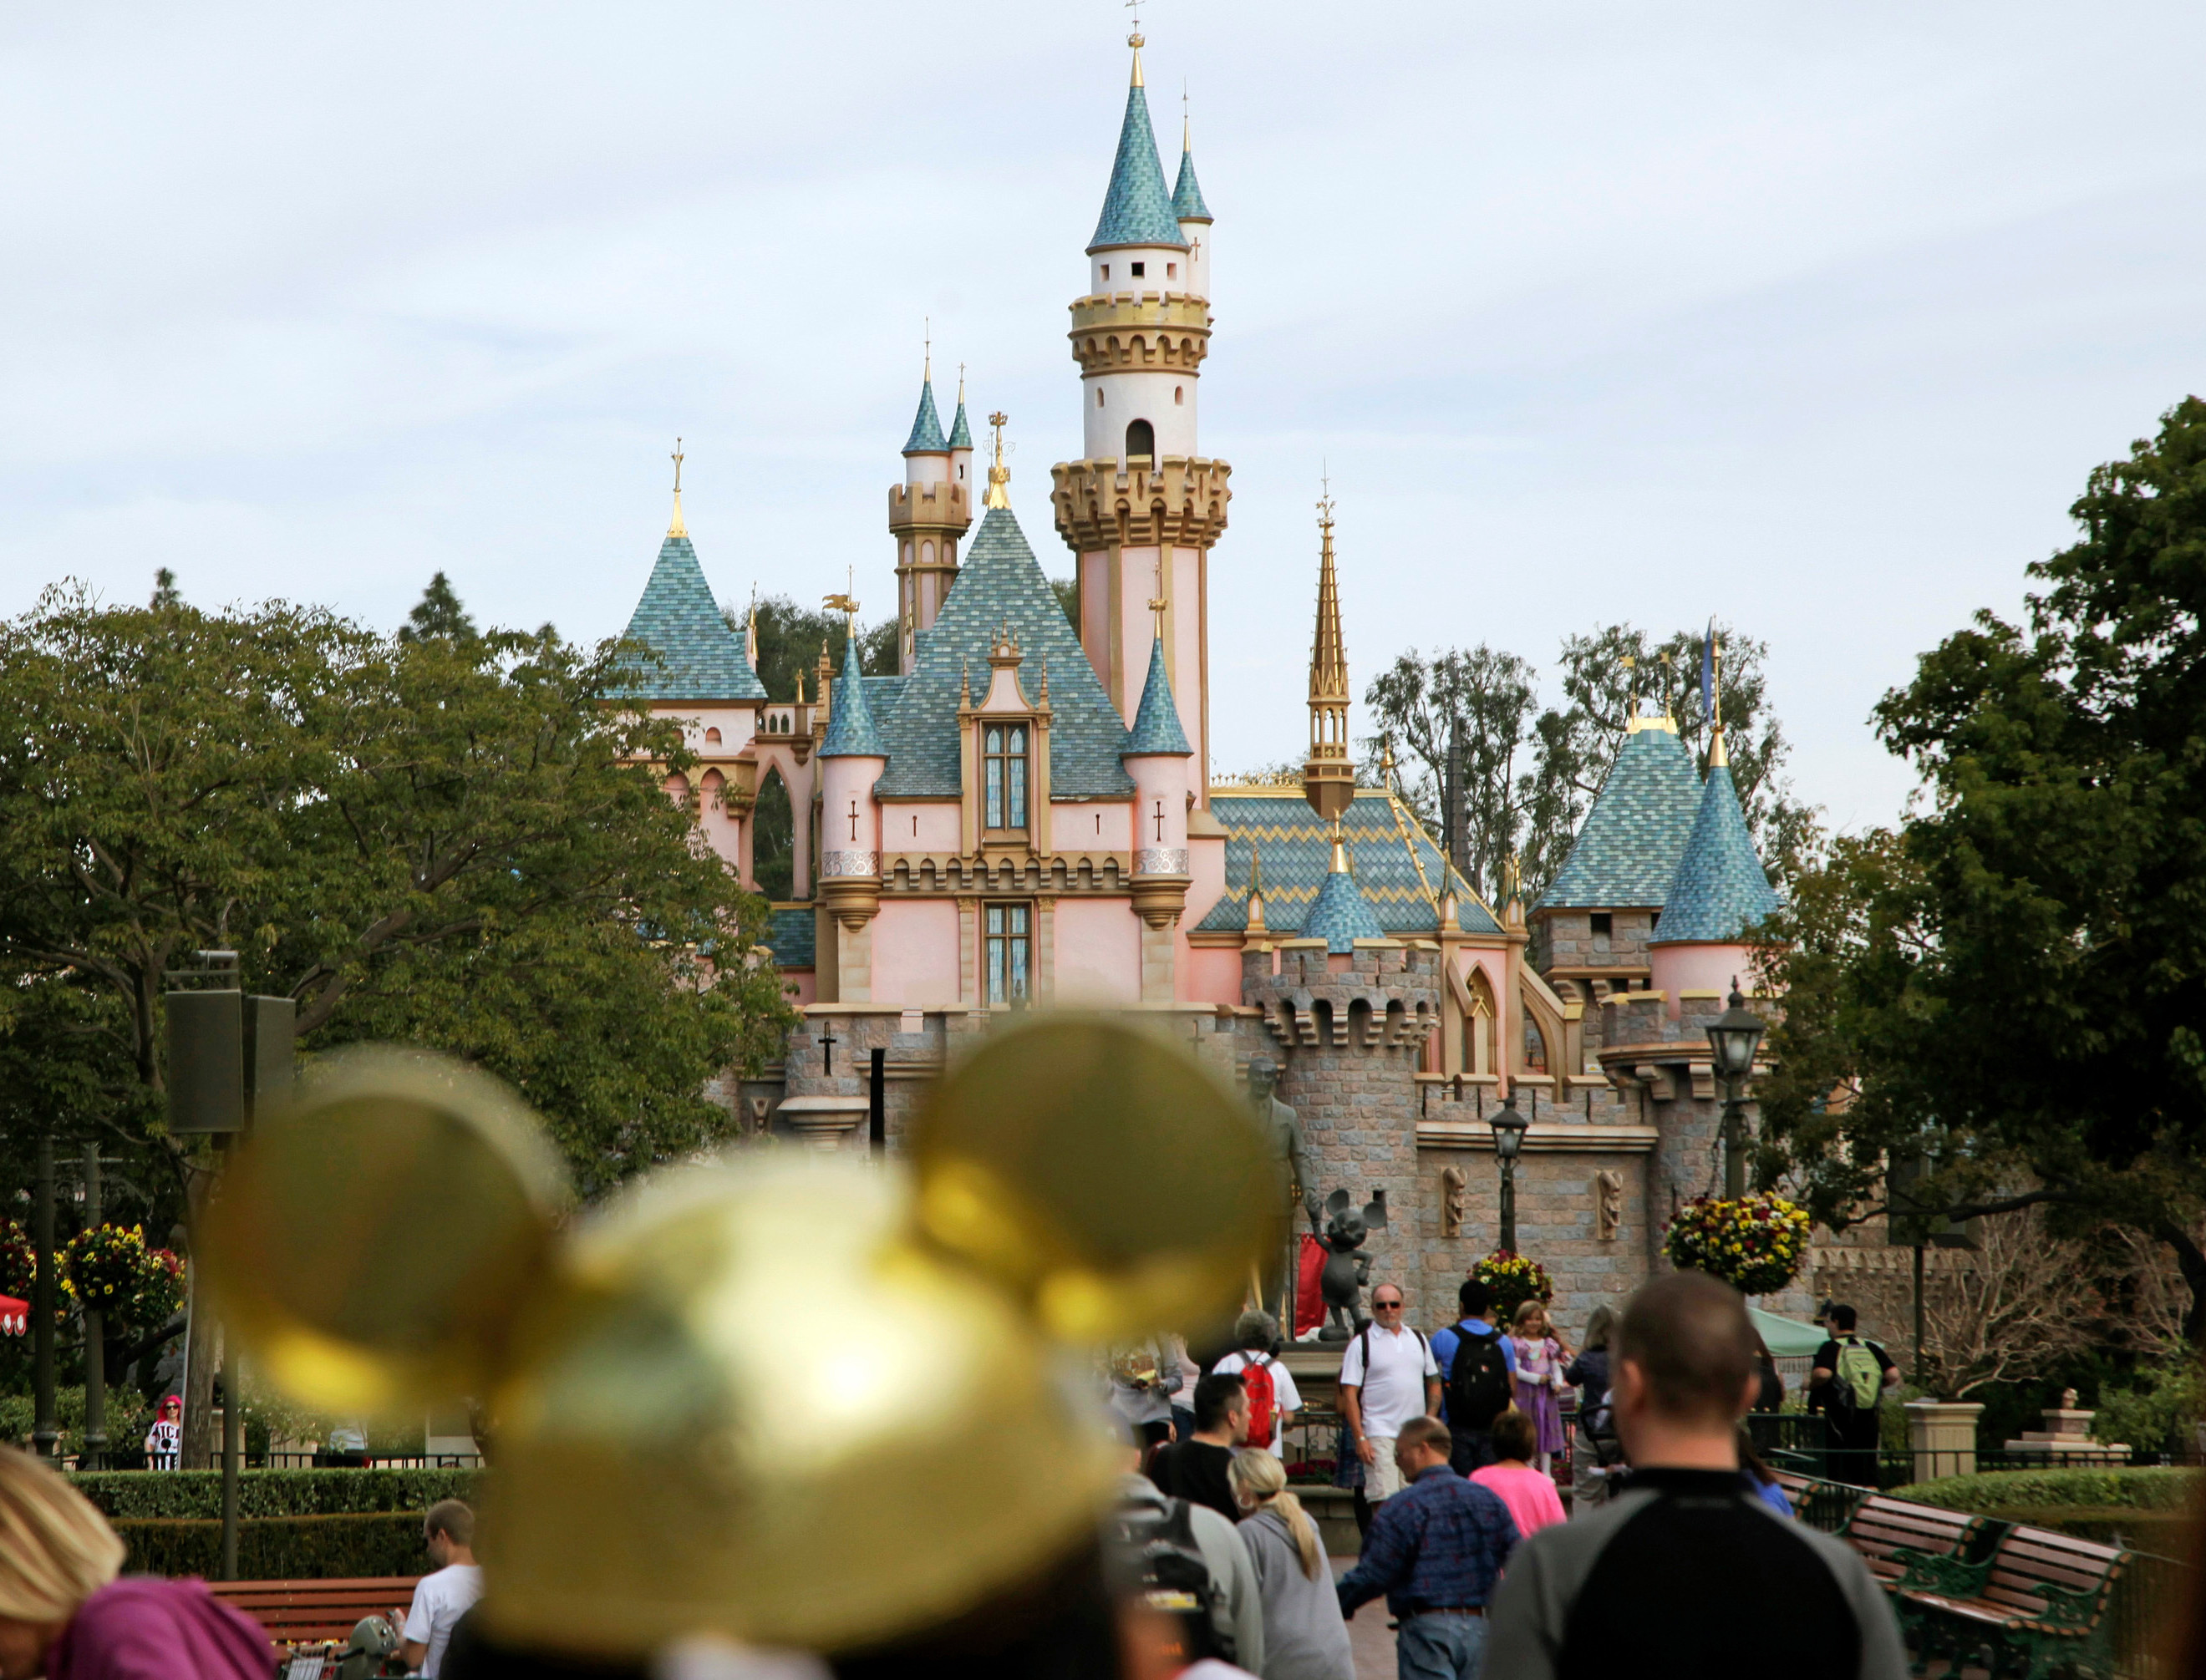 FILE - In this Jan. 22, 2015 file photo, visitors walk toward Sleeping Beauty's Castle at Disneyland Resort in Anaheim, Calif. Authorities say thieves made off with 8,000 Disneyland tickets when they stole a box trailer from a youth agricultural education organization. The California Highway Patrol says the trailer is owned by Future Farmers of America and was stolen Wednesday, April 18, 2018, from the group's office in the city of Galt, south of Sacramento. (AP Photo/Jae C. Hong, File)